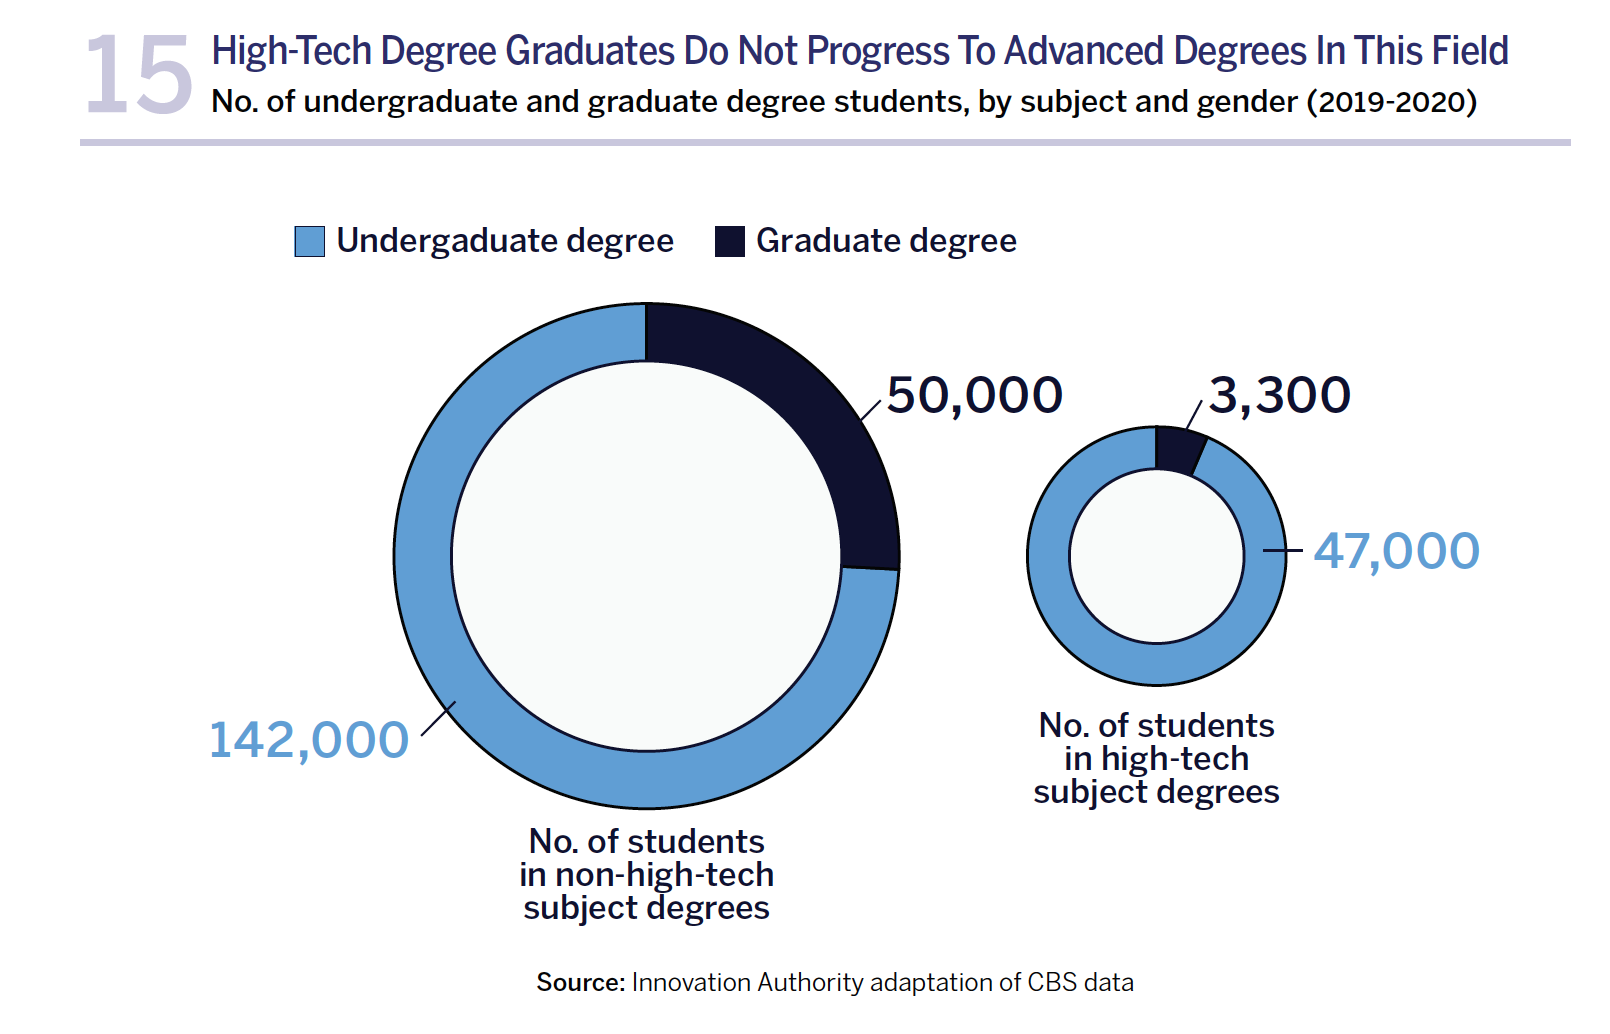 High-Tech Degree Graduates Do Not Progress To Advanced Degrees In This Field